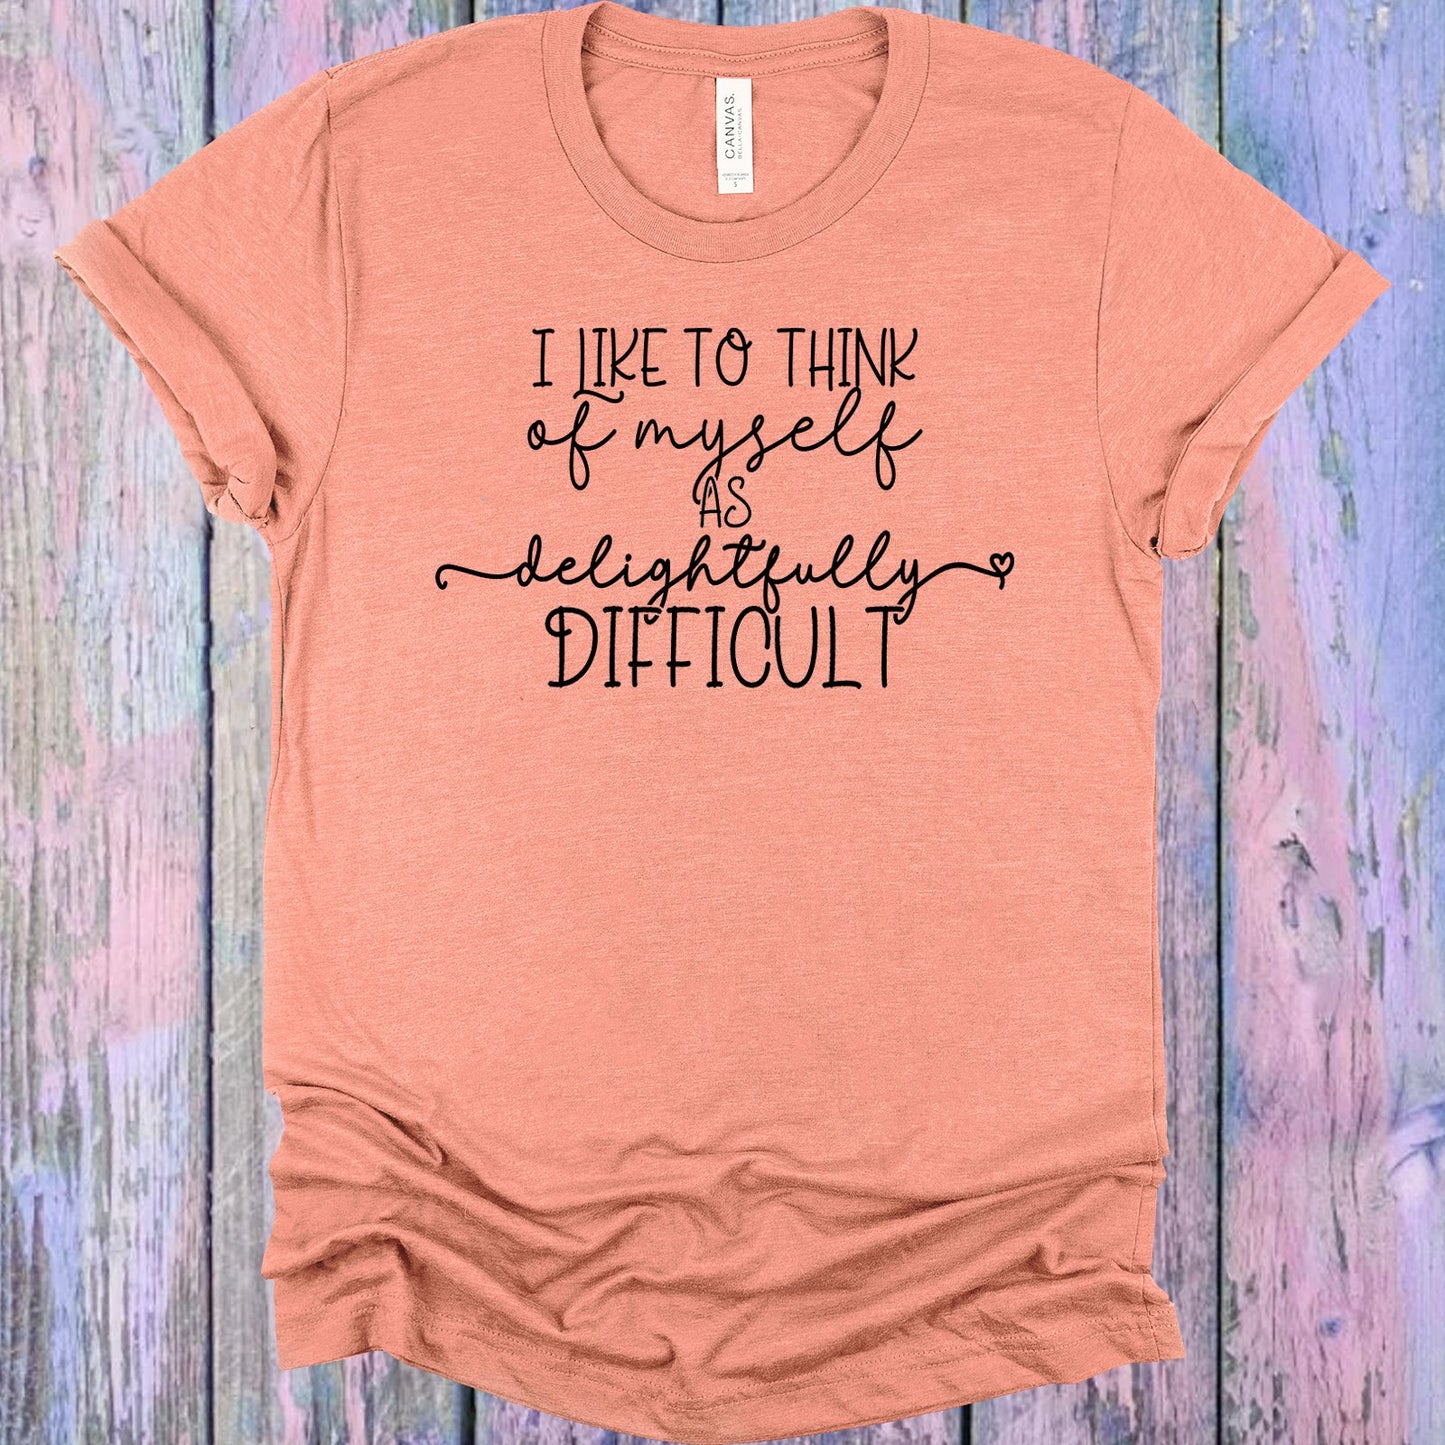 I Like To Think Of Myself As Delightfully Difficult Graphic Tee Graphic Tee